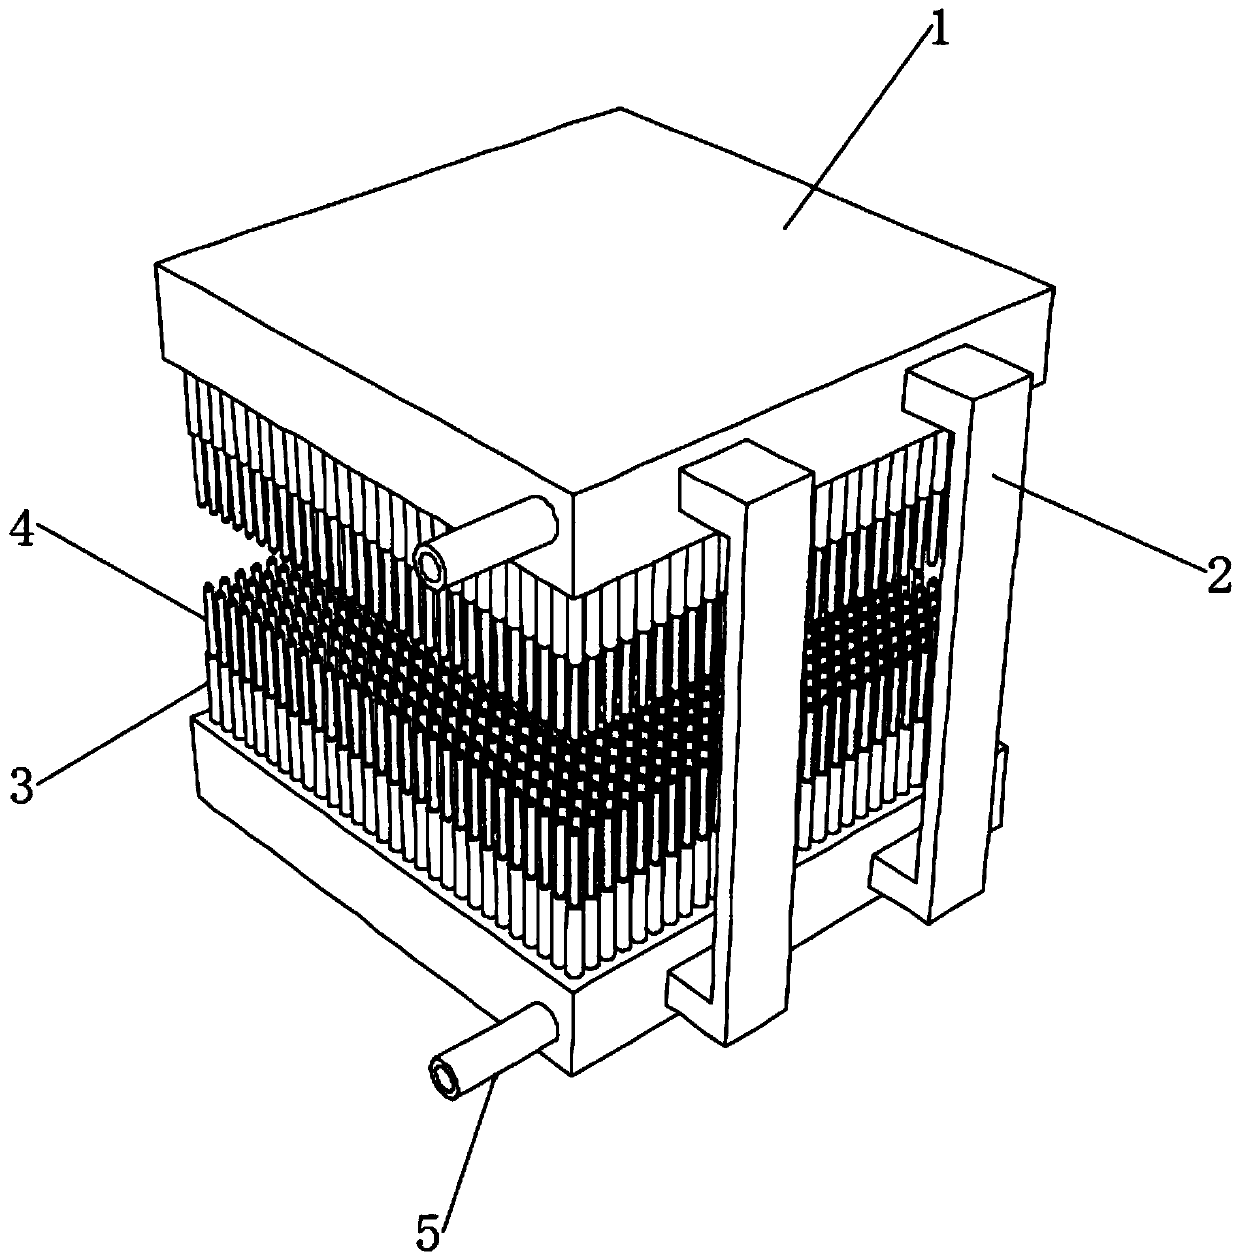 Quick workpiece cooling device for hardware processing